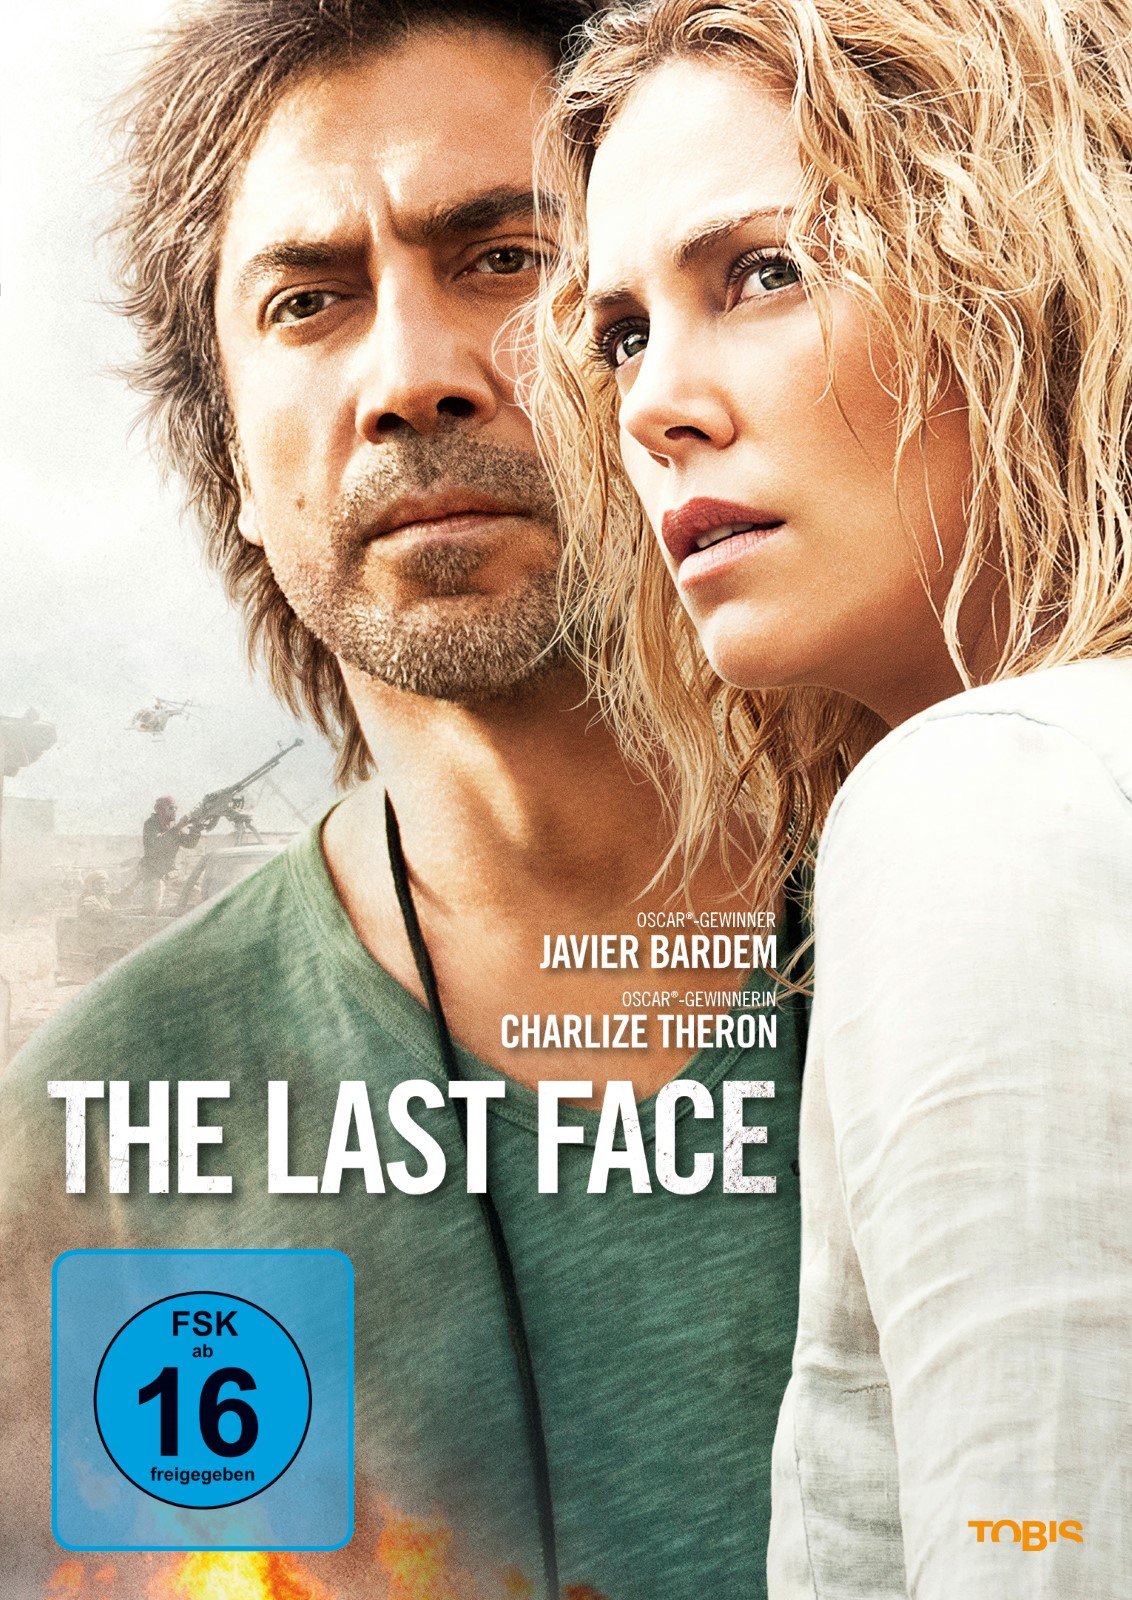 The Last Face Film 2016 Filmstarts De Oscar winner javier bardem will star opposite charlize theron in sean penn's african drama the last face, an individual familiar with the project story explores the tough moral decisions they face, as well as others. filmstarts